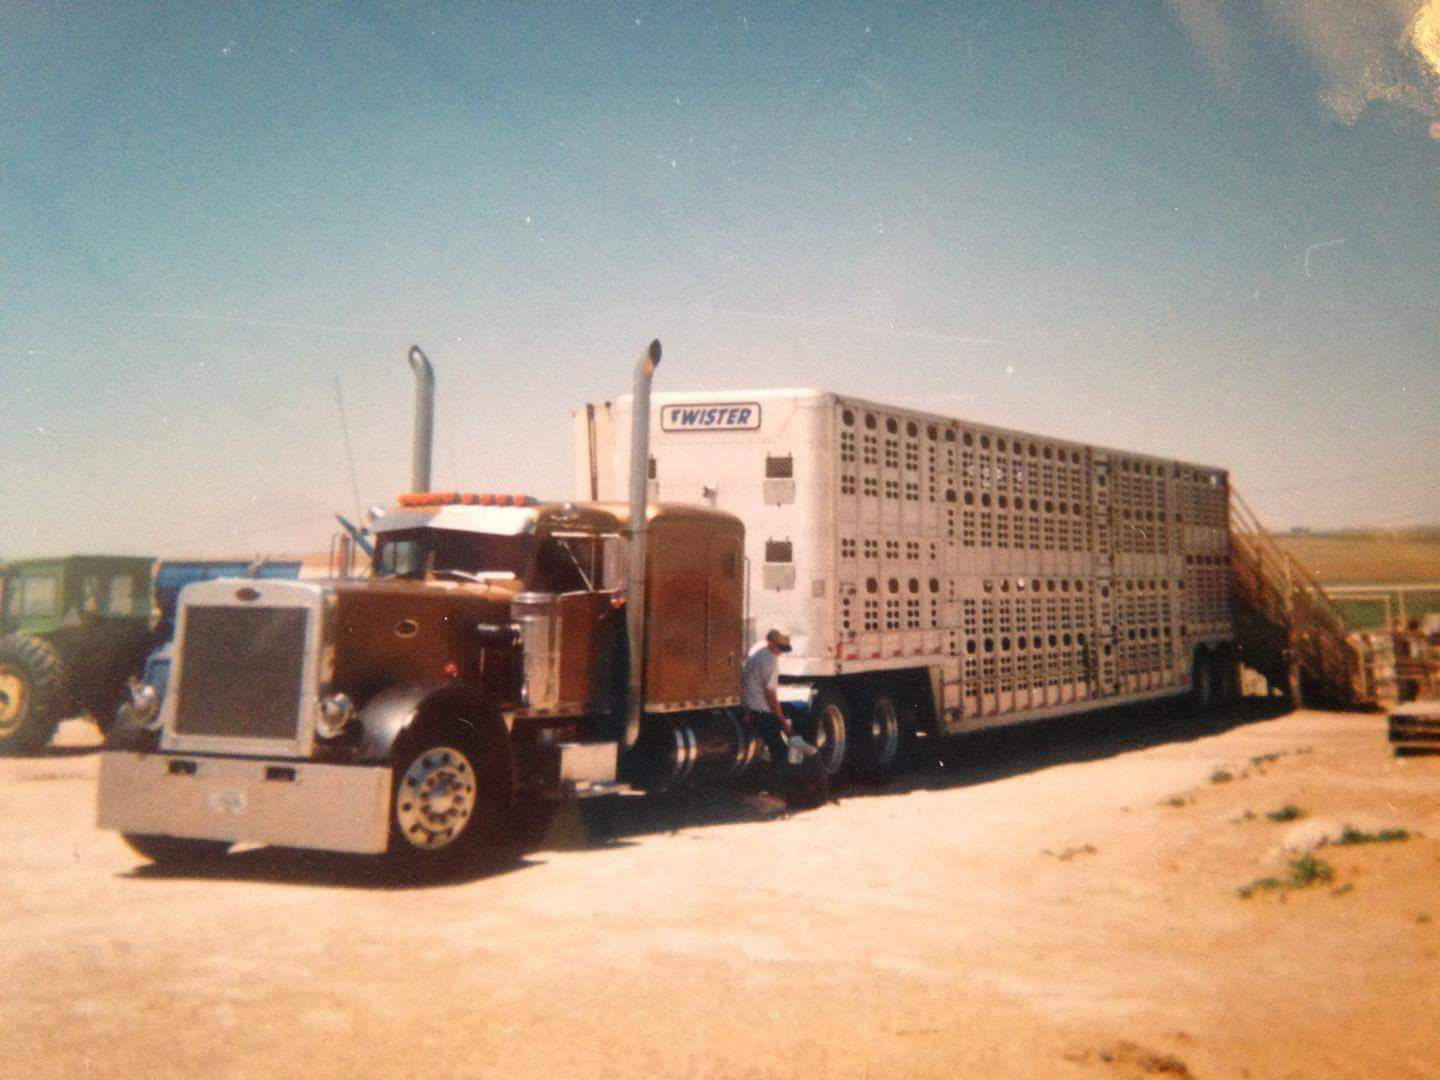 A shot of Reagan’s 1970 Peterbilt 358 during its working years. It was retired in 2004.